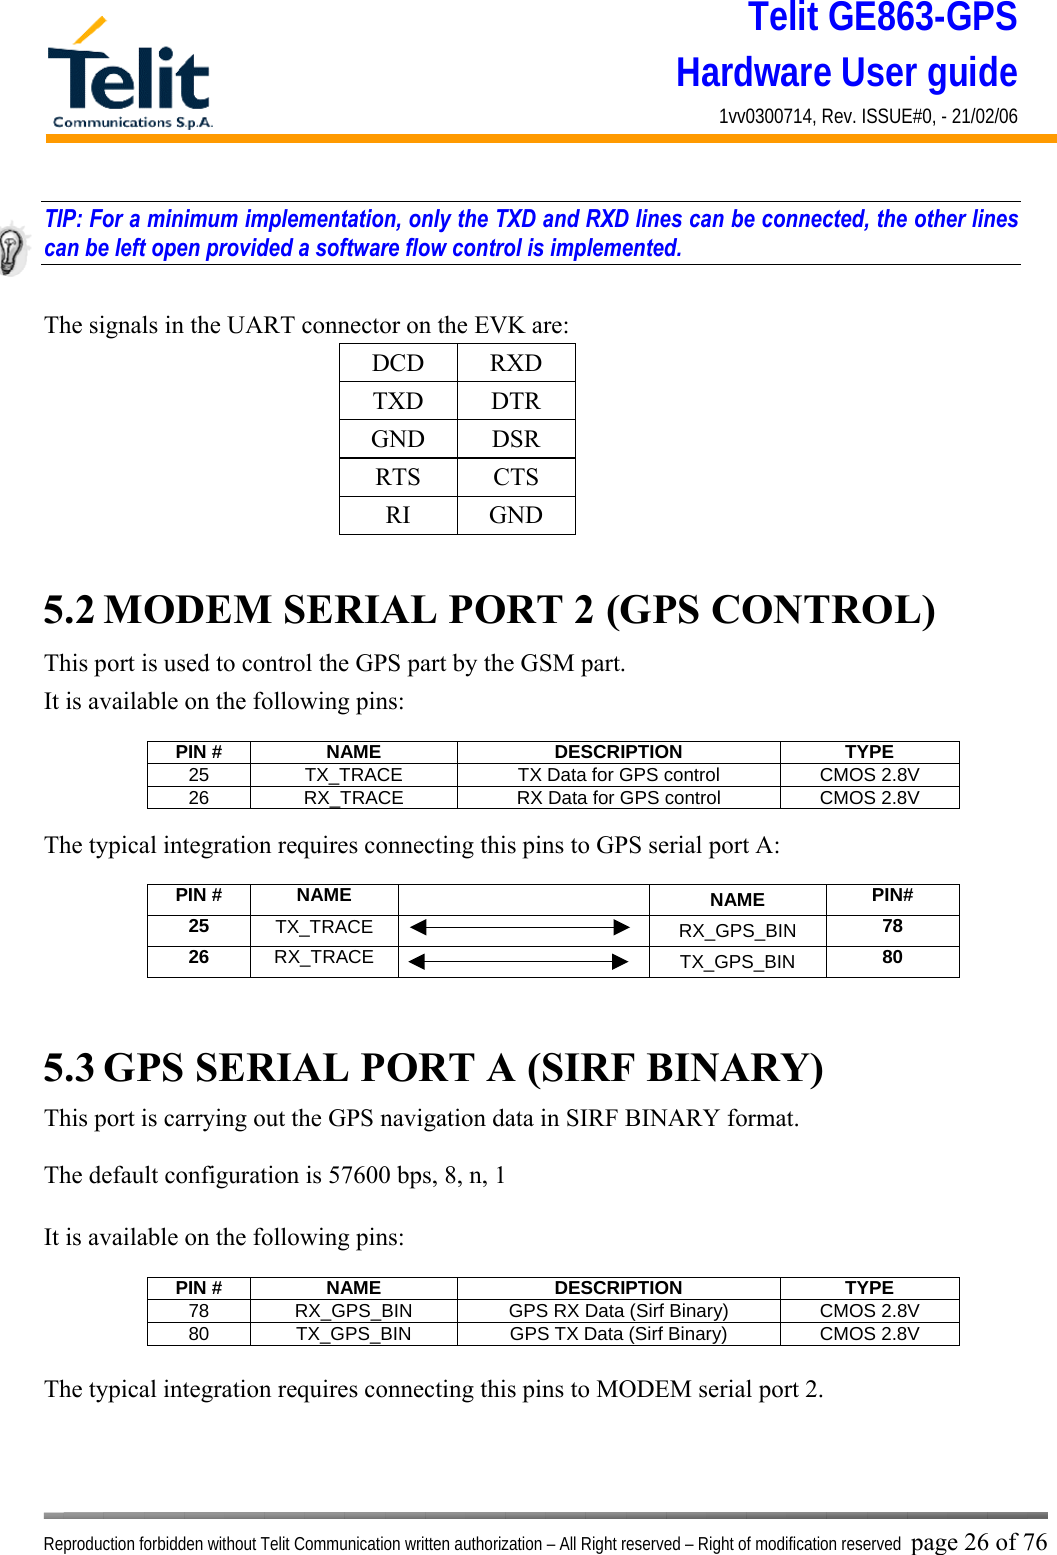 Telit GE863-GPS Hardware User guide 1vv0300714, Rev. ISSUE#0, - 21/02/06    Reproduction forbidden without Telit Communication written authorization – All Right reserved – Right of modification reserved page 26 of 76 TIP: For a minimum implementation, only the TXD and RXD lines can be connected, the other lines can be left open provided a software flow control is implemented.  The signals in the UART connector on the EVK are: DCD RXD TXD DTR GND DSR RTS CTS RI GND  5.2 MODEM SERIAL PORT 2 (GPS CONTROL) This port is used to control the GPS part by the GSM part. It is available on the following pins:  PIN #  NAME  DESCRIPTION  TYPE 25  TX_TRACE  TX Data for GPS control  CMOS 2.8V 26  RX_TRACE  RX Data for GPS control  CMOS 2.8V  The typical integration requires connecting this pins to GPS serial port A:  PIN #  NAME    NAME  PIN# 25  TX_TRACE   RX_GPS_BIN  78 26  RX_TRACE   TX_GPS_BIN  80   5.3 GPS SERIAL PORT A (SIRF BINARY) This port is carrying out the GPS navigation data in SIRF BINARY format.  The default configuration is 57600 bps, 8, n, 1  It is available on the following pins:  PIN #  NAME  DESCRIPTION  TYPE 78  RX_GPS_BIN  GPS RX Data (Sirf Binary)  CMOS 2.8V 80  TX_GPS_BIN  GPS TX Data (Sirf Binary)  CMOS 2.8V  The typical integration requires connecting this pins to MODEM serial port 2.    